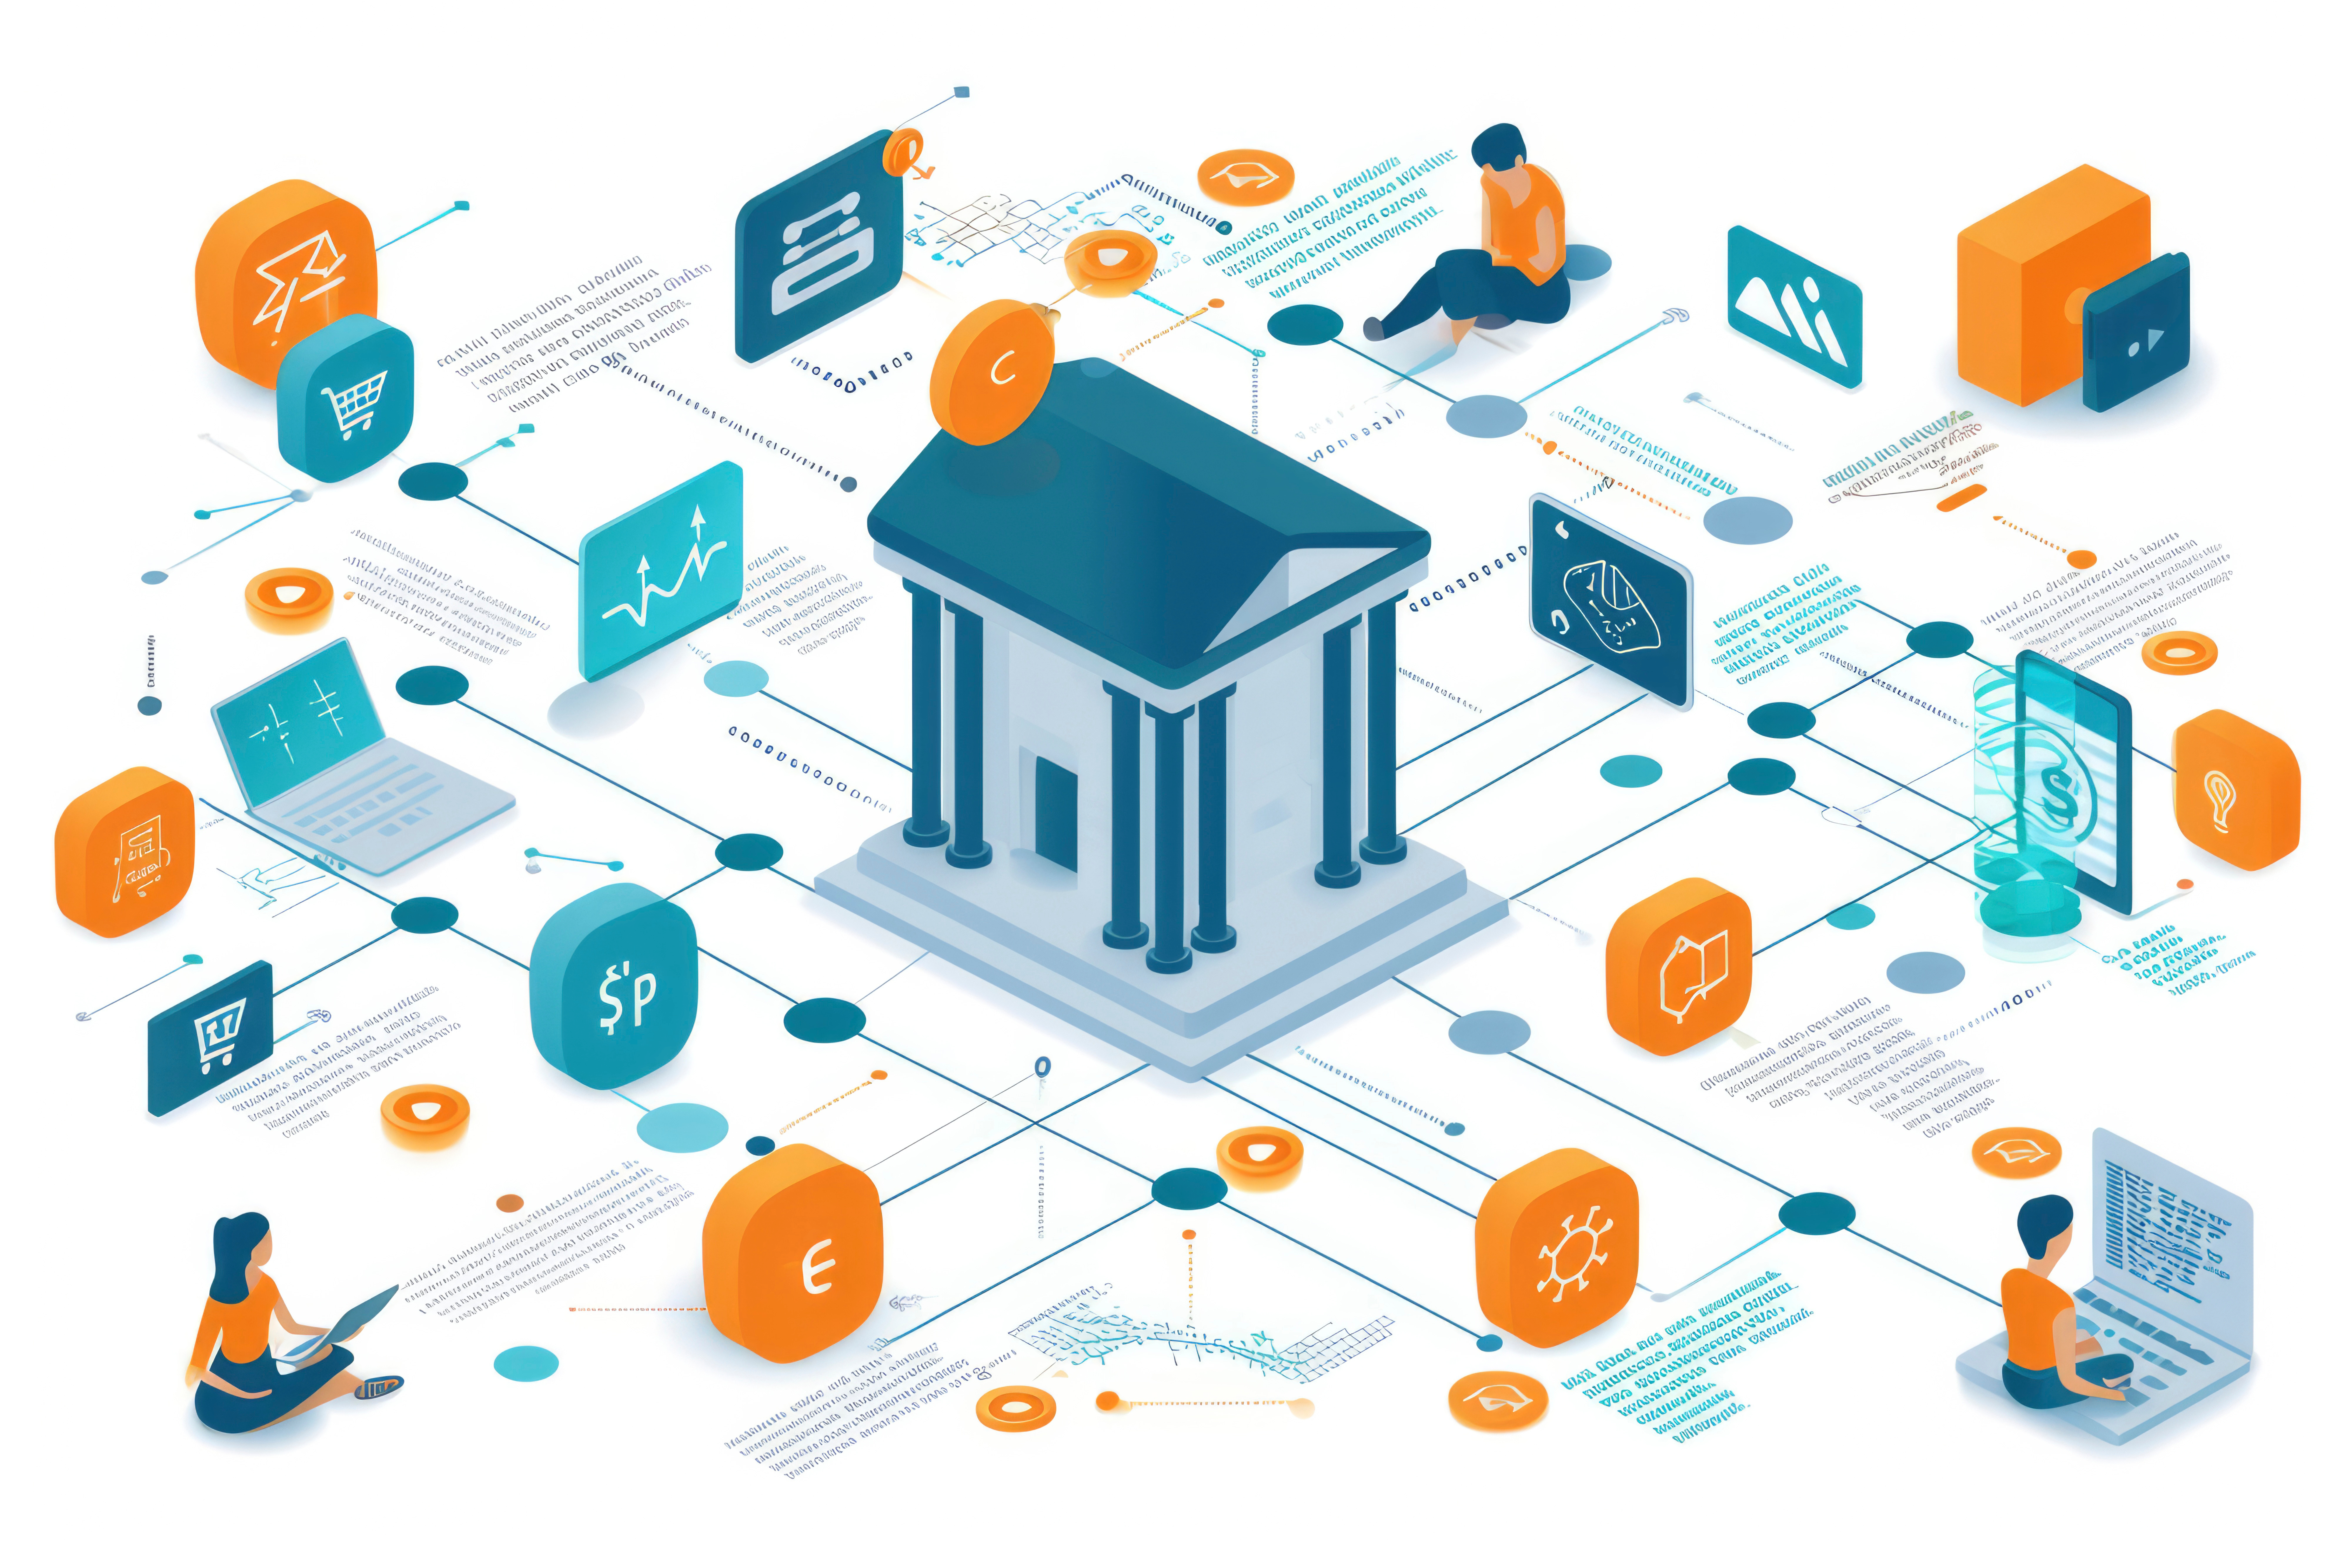 Ecosystem Collaboration: Open banking encourages collaboration between traditional financial institutions and new fintech players